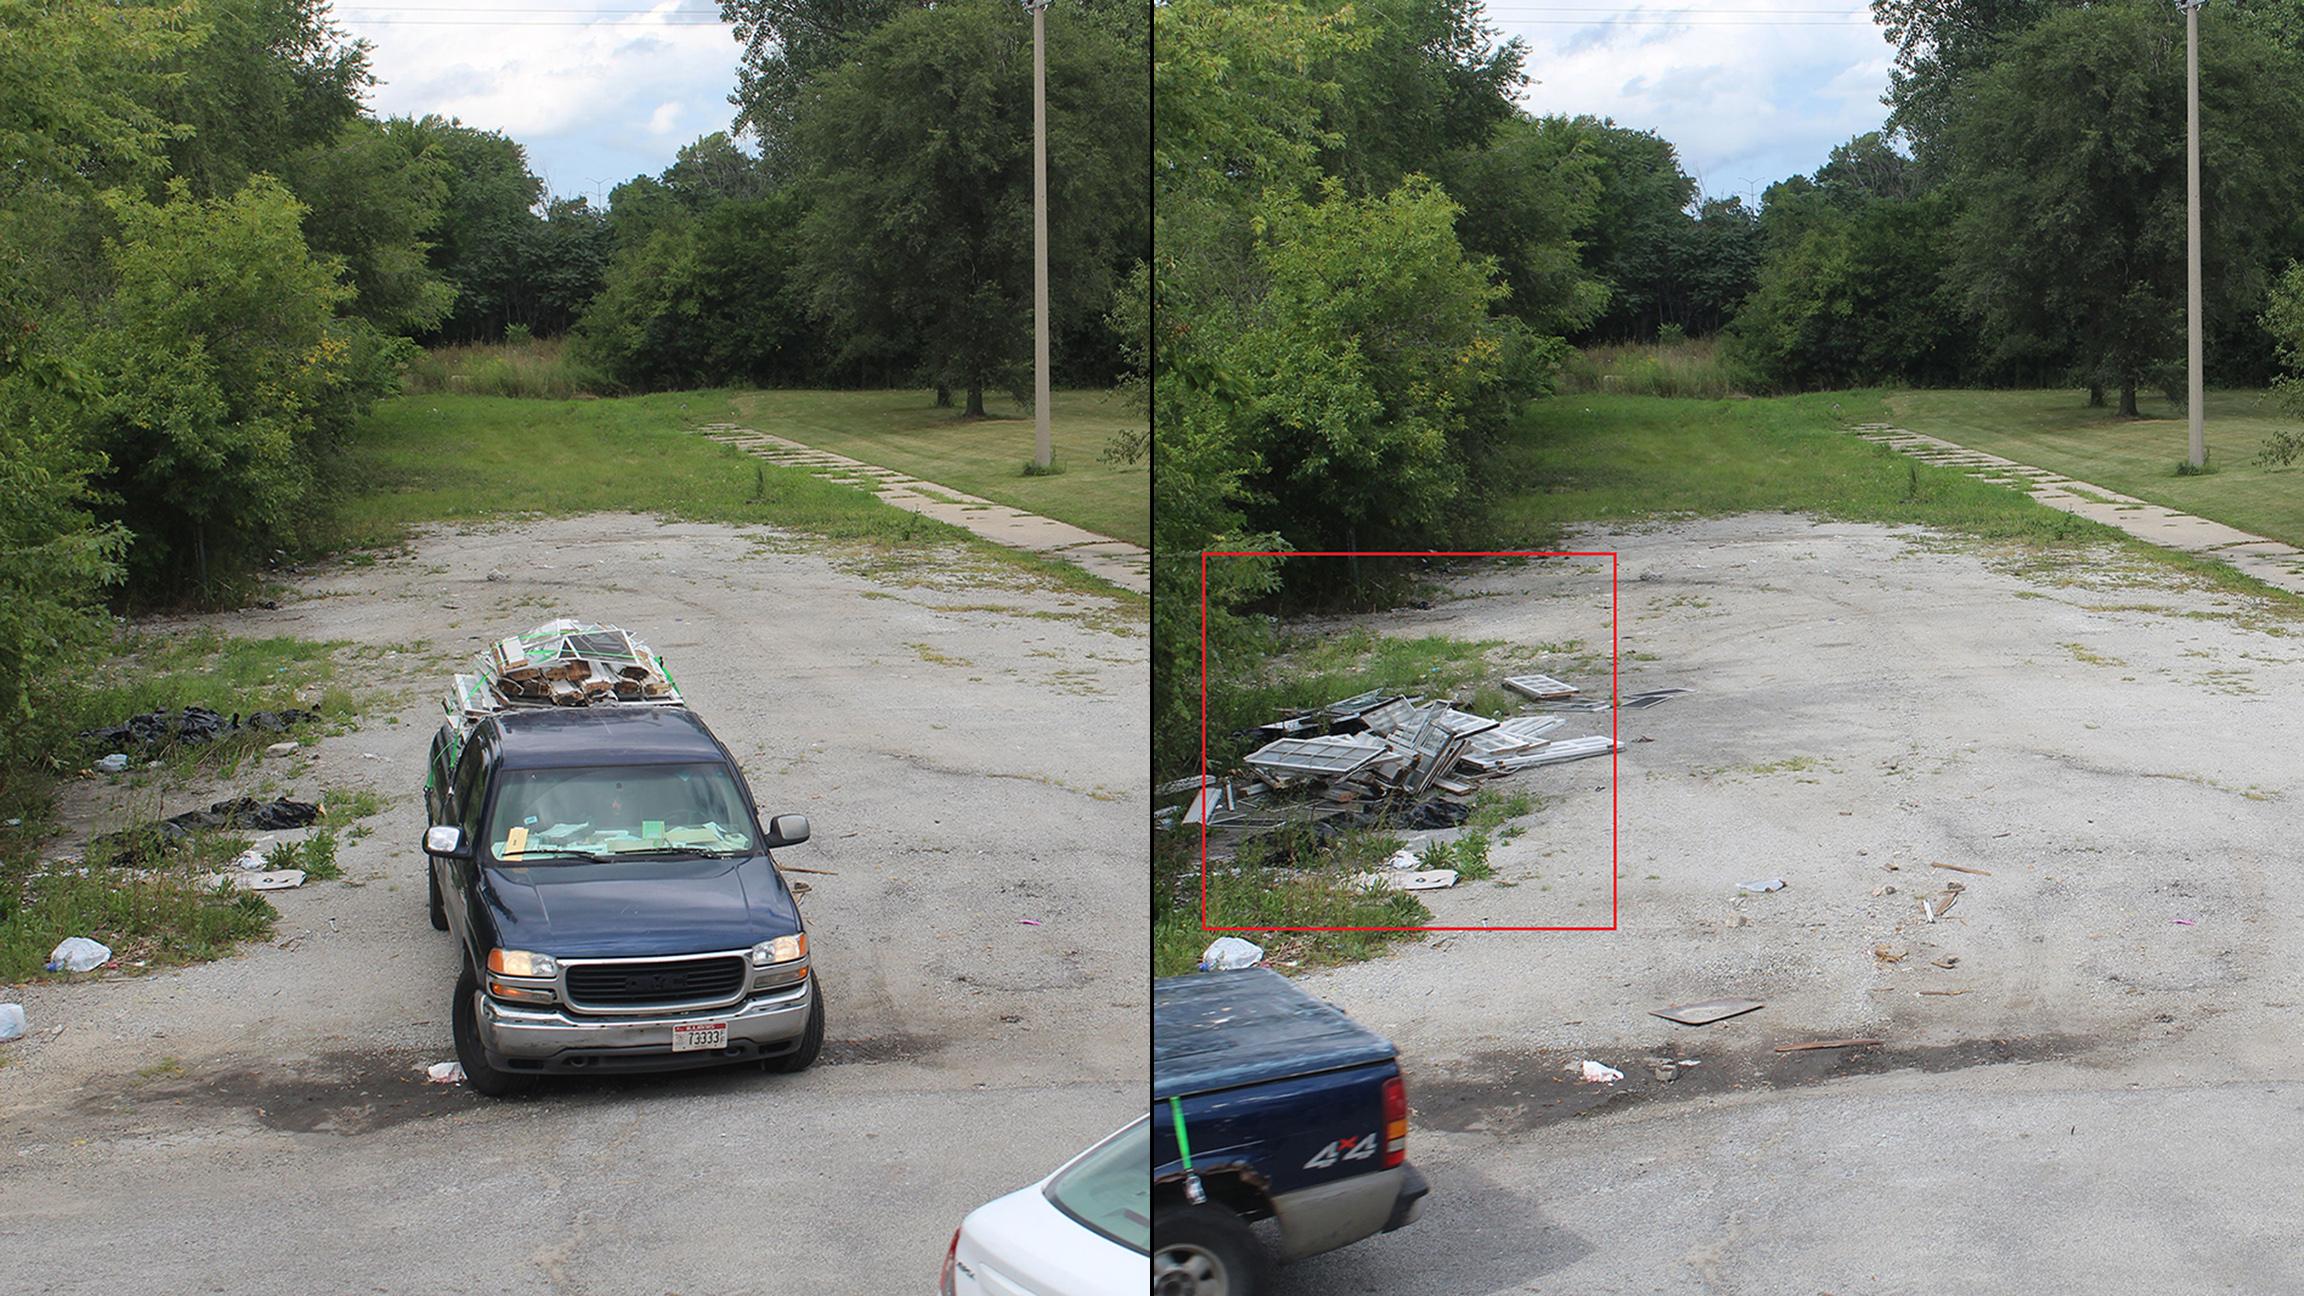 Before and after photos show an incidence of illegal dumping in Chicago. (Courtesy of Chicago Department of Streets and Sanitation)